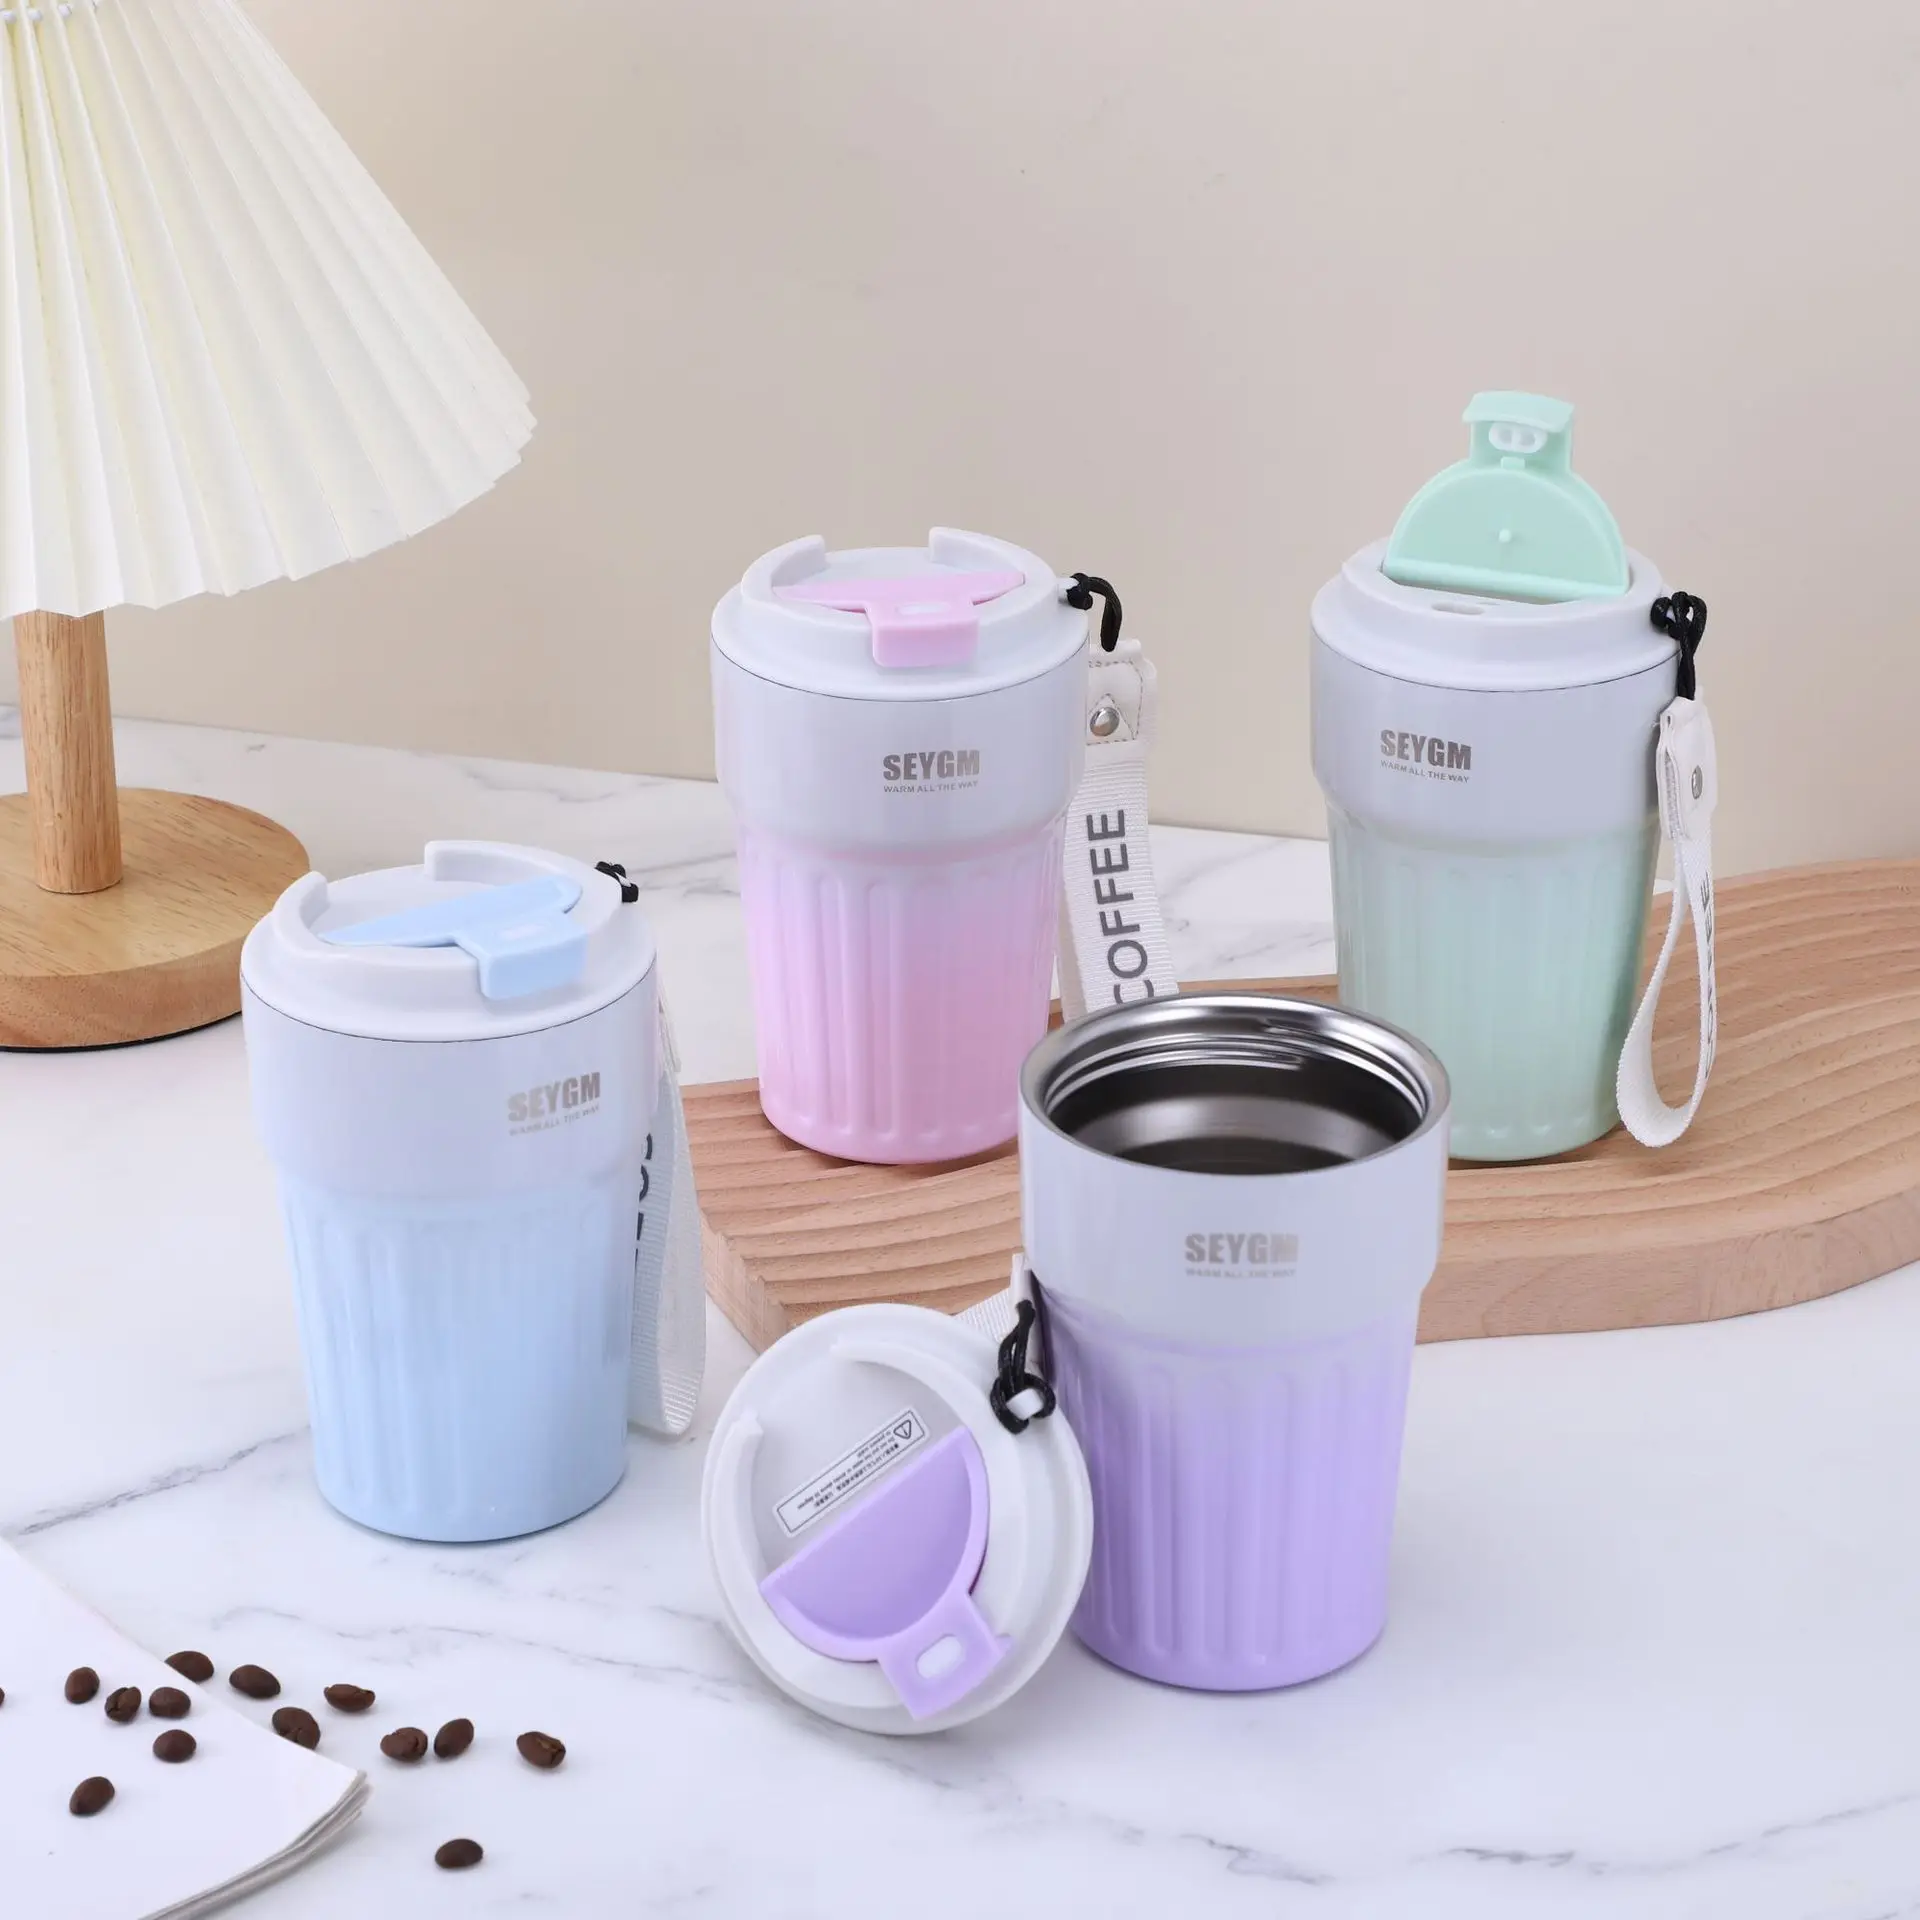 https://ae01.alicdn.com/kf/S7011c5af101445e68e9ecd9ec4d13851m/12oz-Thermo-Cafe-Car-Thermos-Mug-for-Tea-Water-Coffee-Leak-Proof-Travel-Thermo-Cup-Coffee.jpg